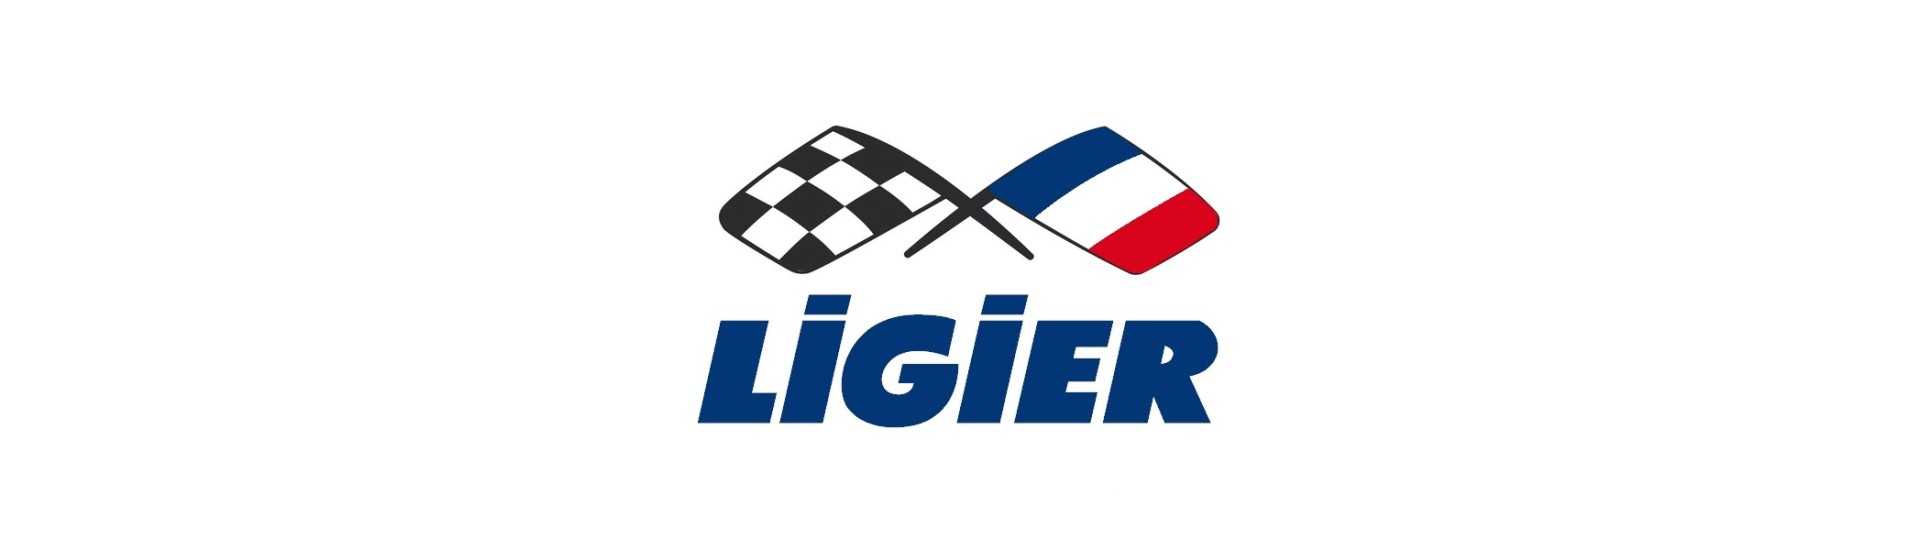 Best price brake hose for car without a permit Ligier